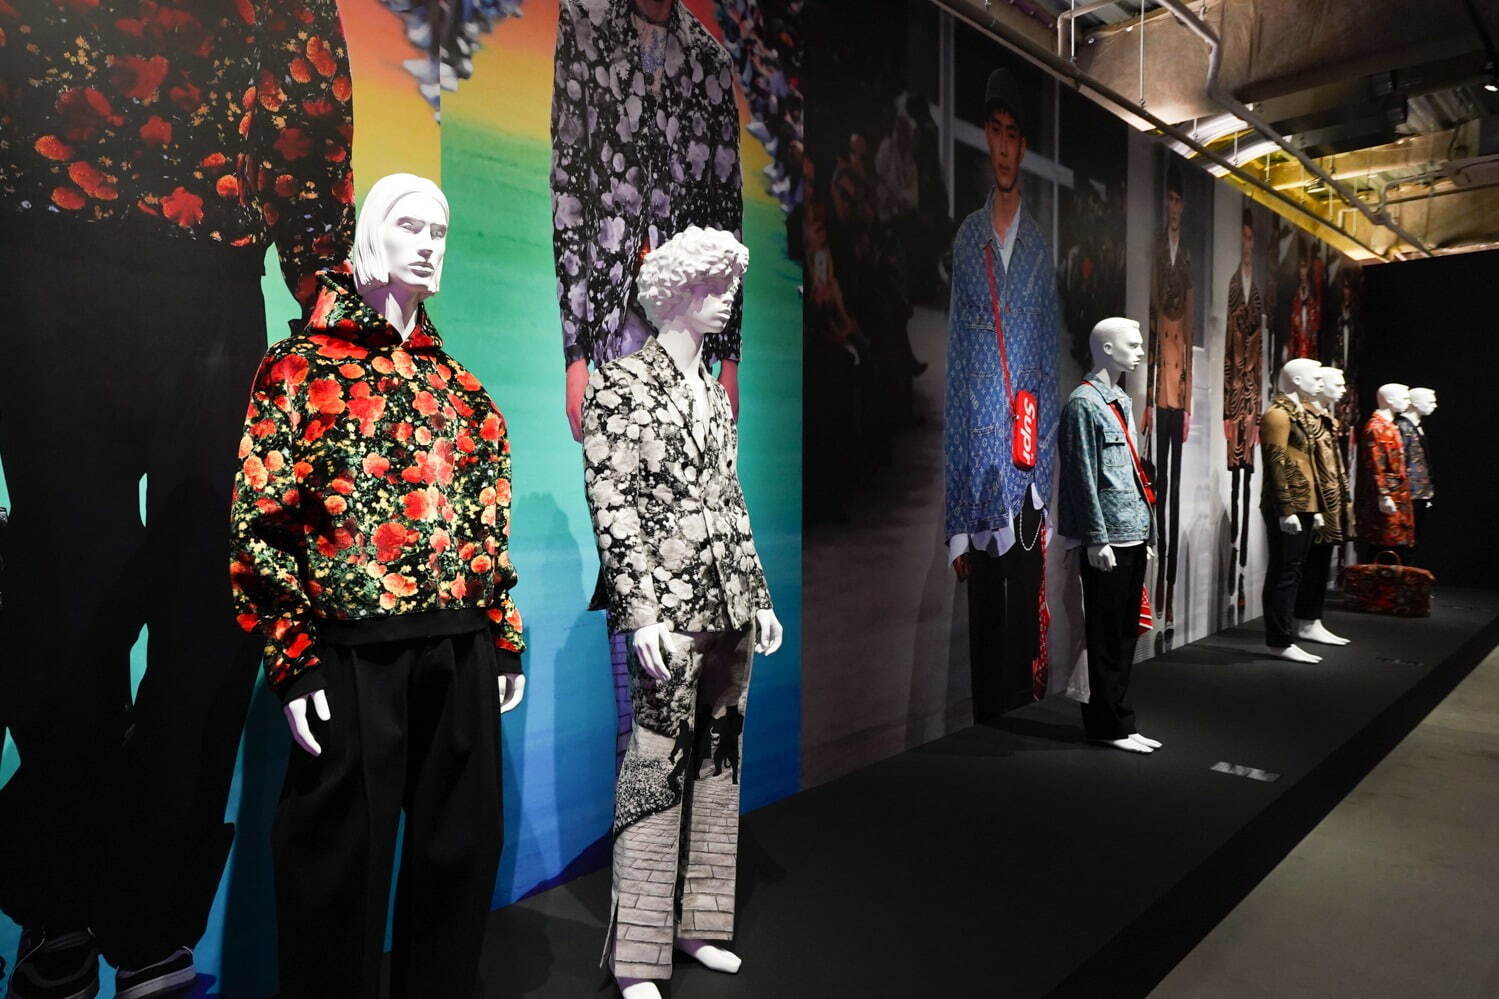 Louis Vuitton travelling fashion exhibition has arrived in Australia